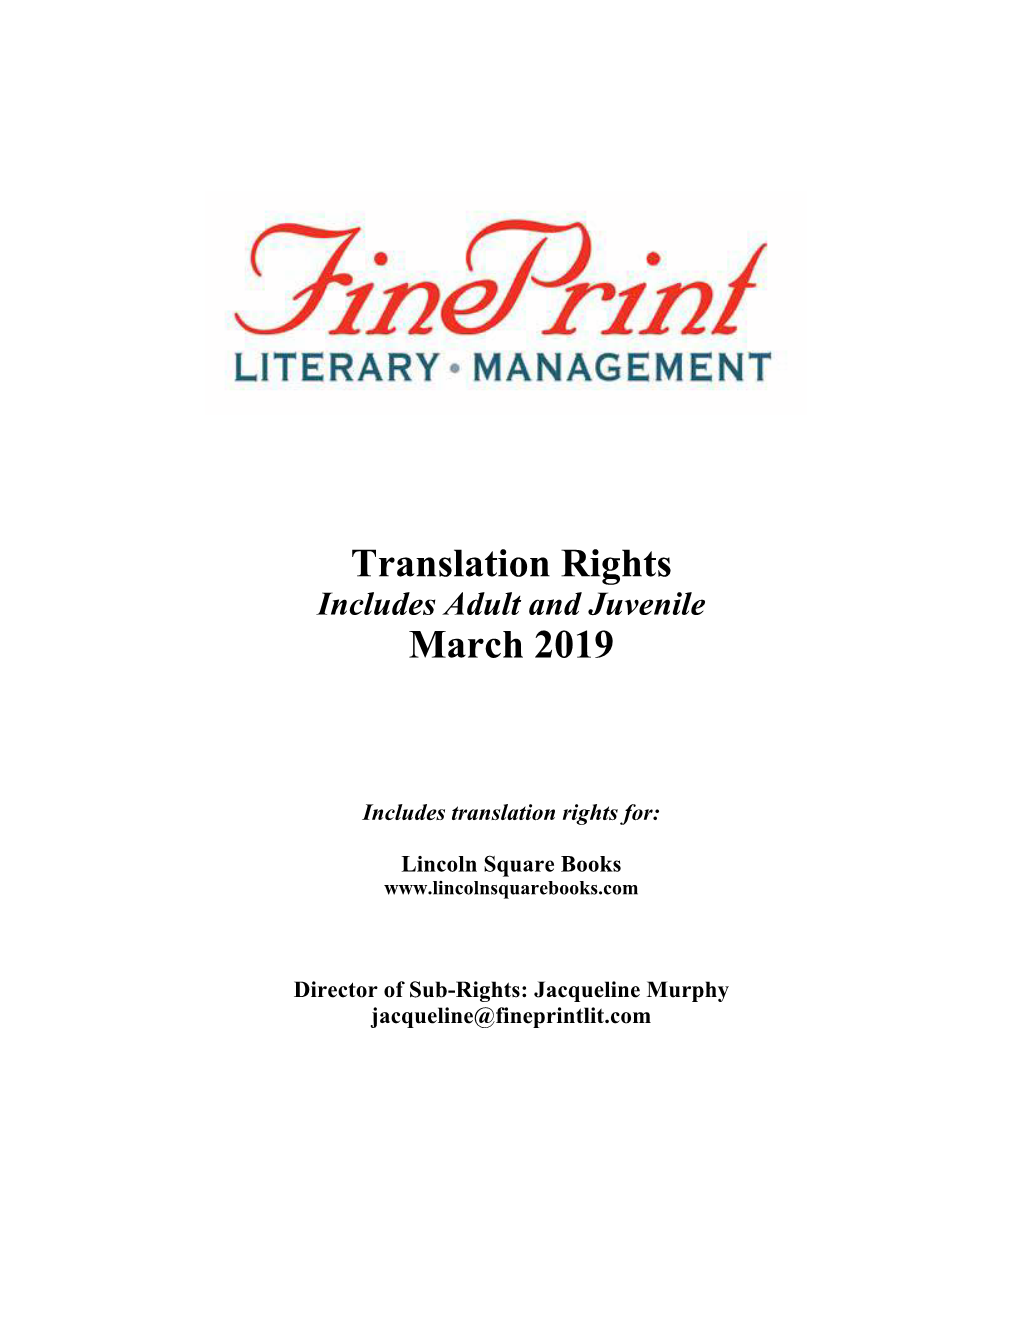 Translation Rights March 2019